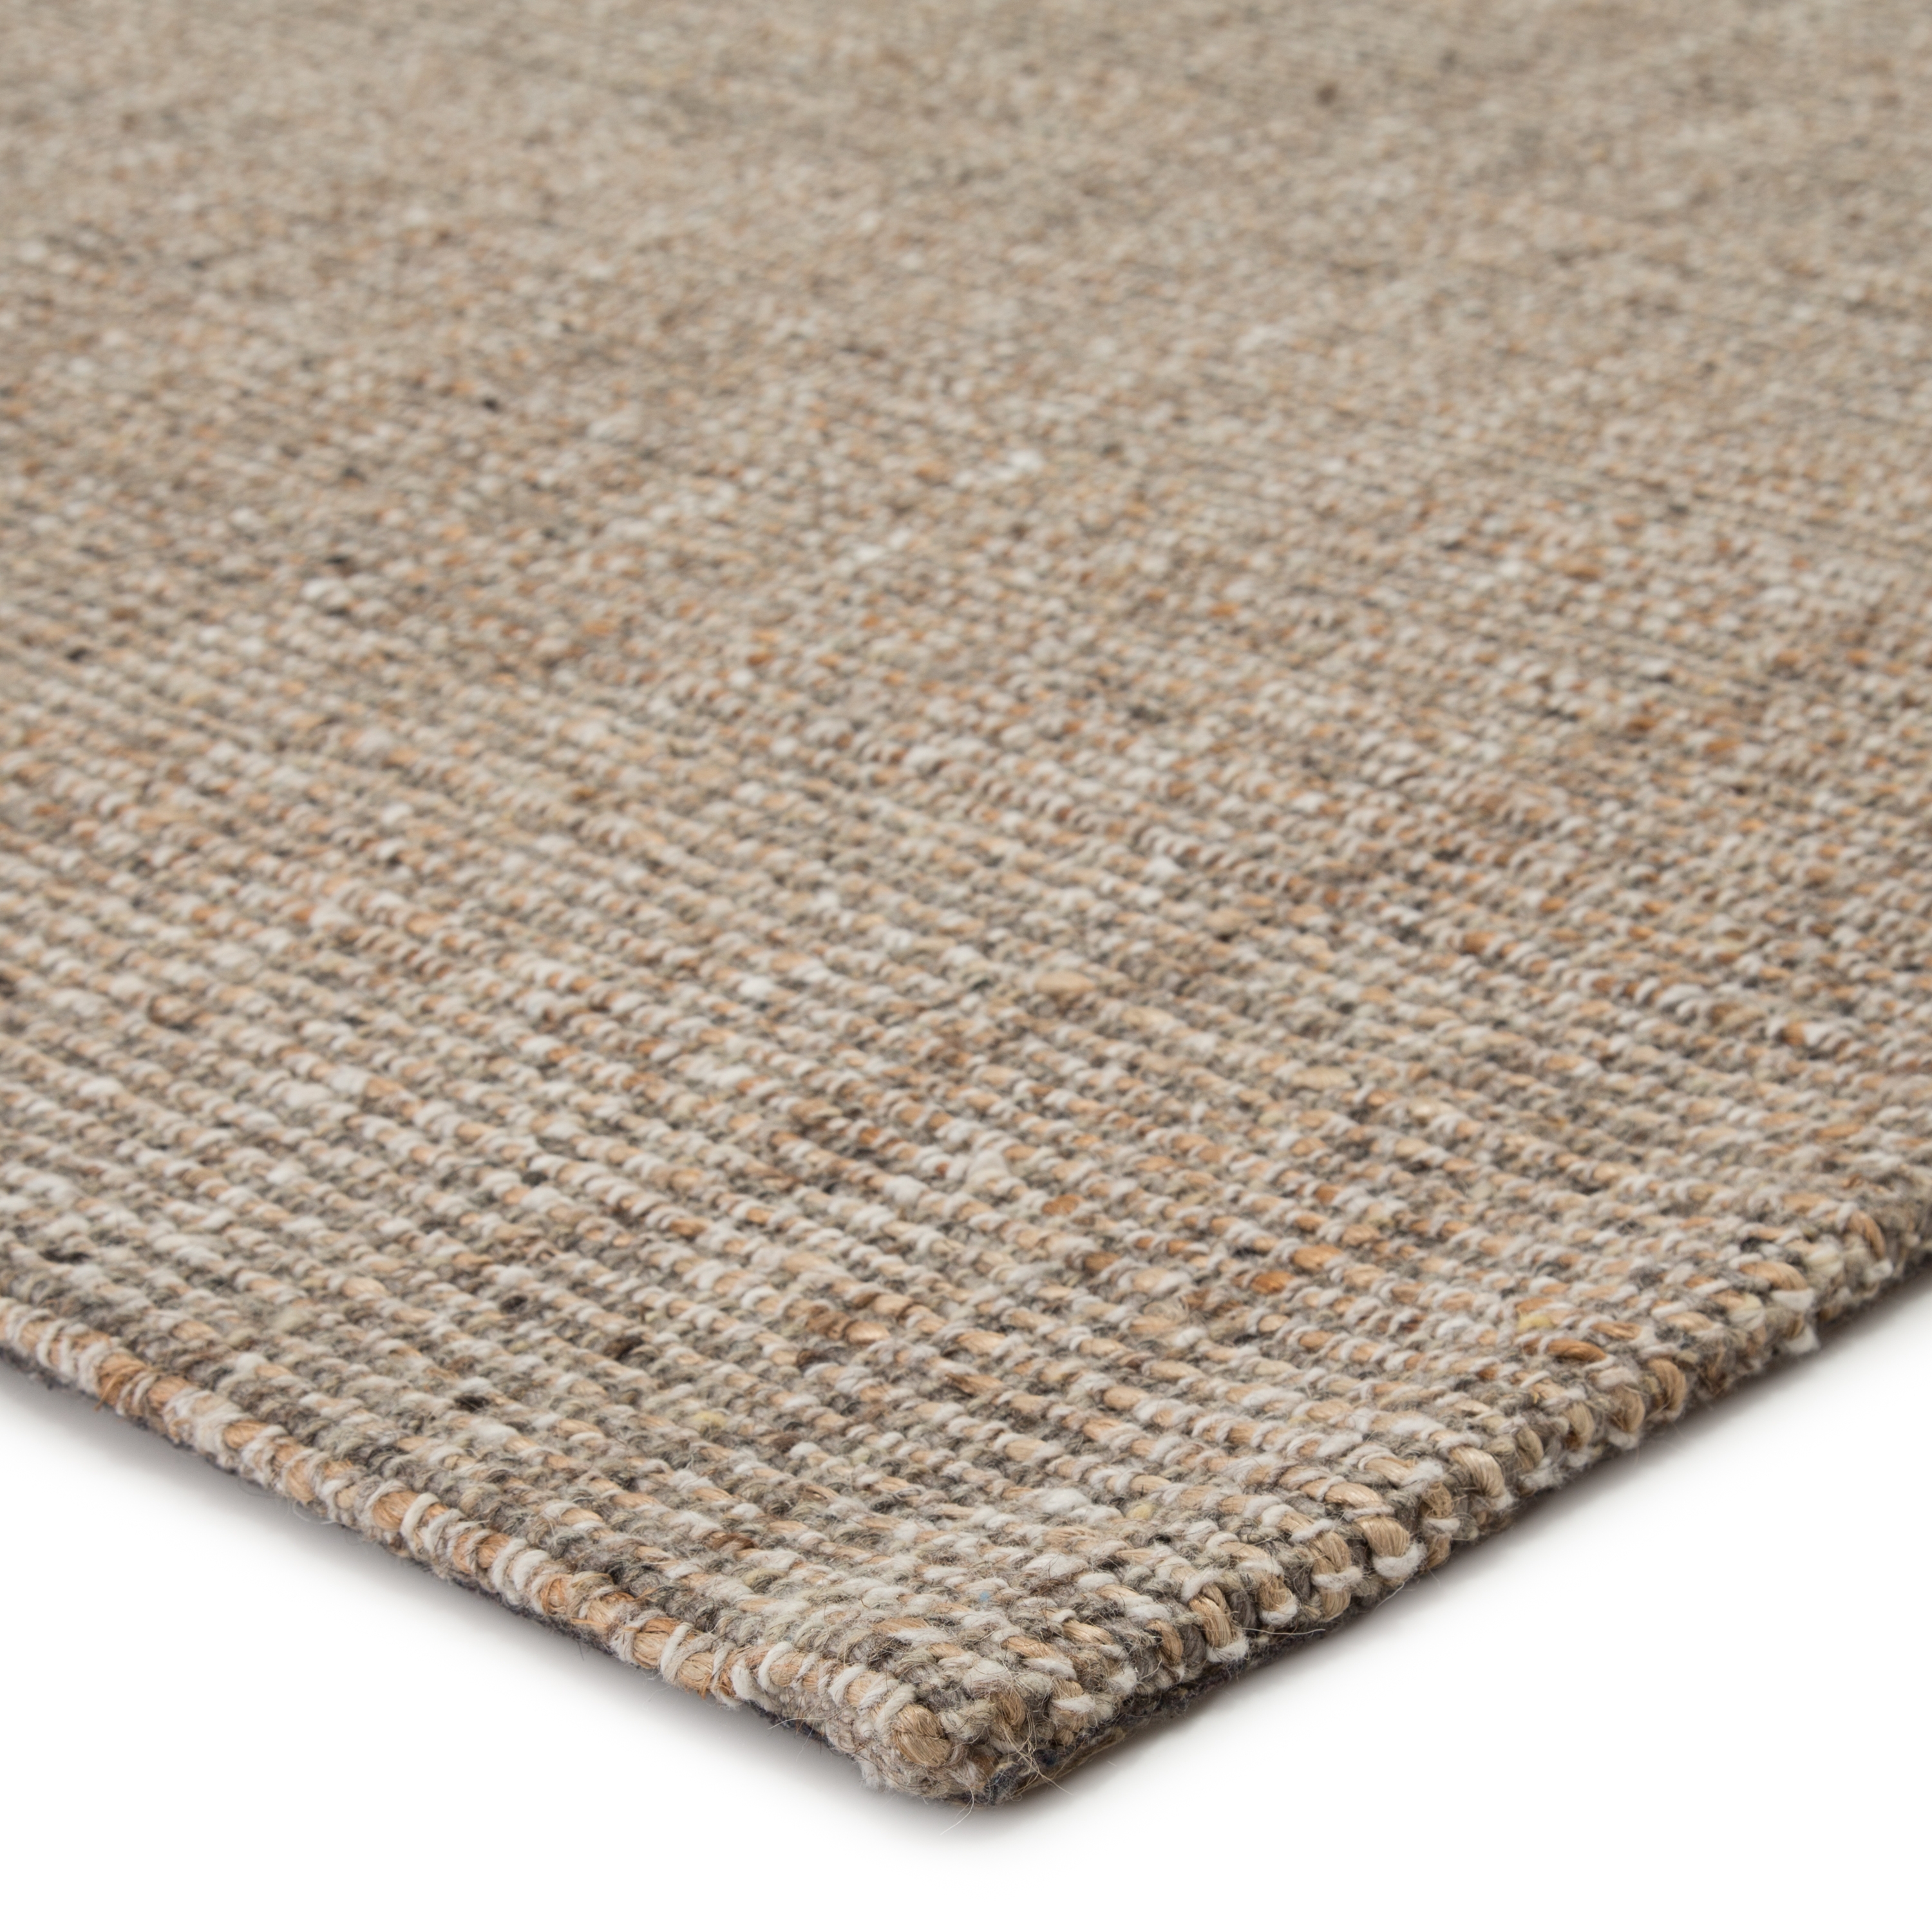 Sutton Natural Solid Tan/ Black Area Rug (5'X8') - Image 1